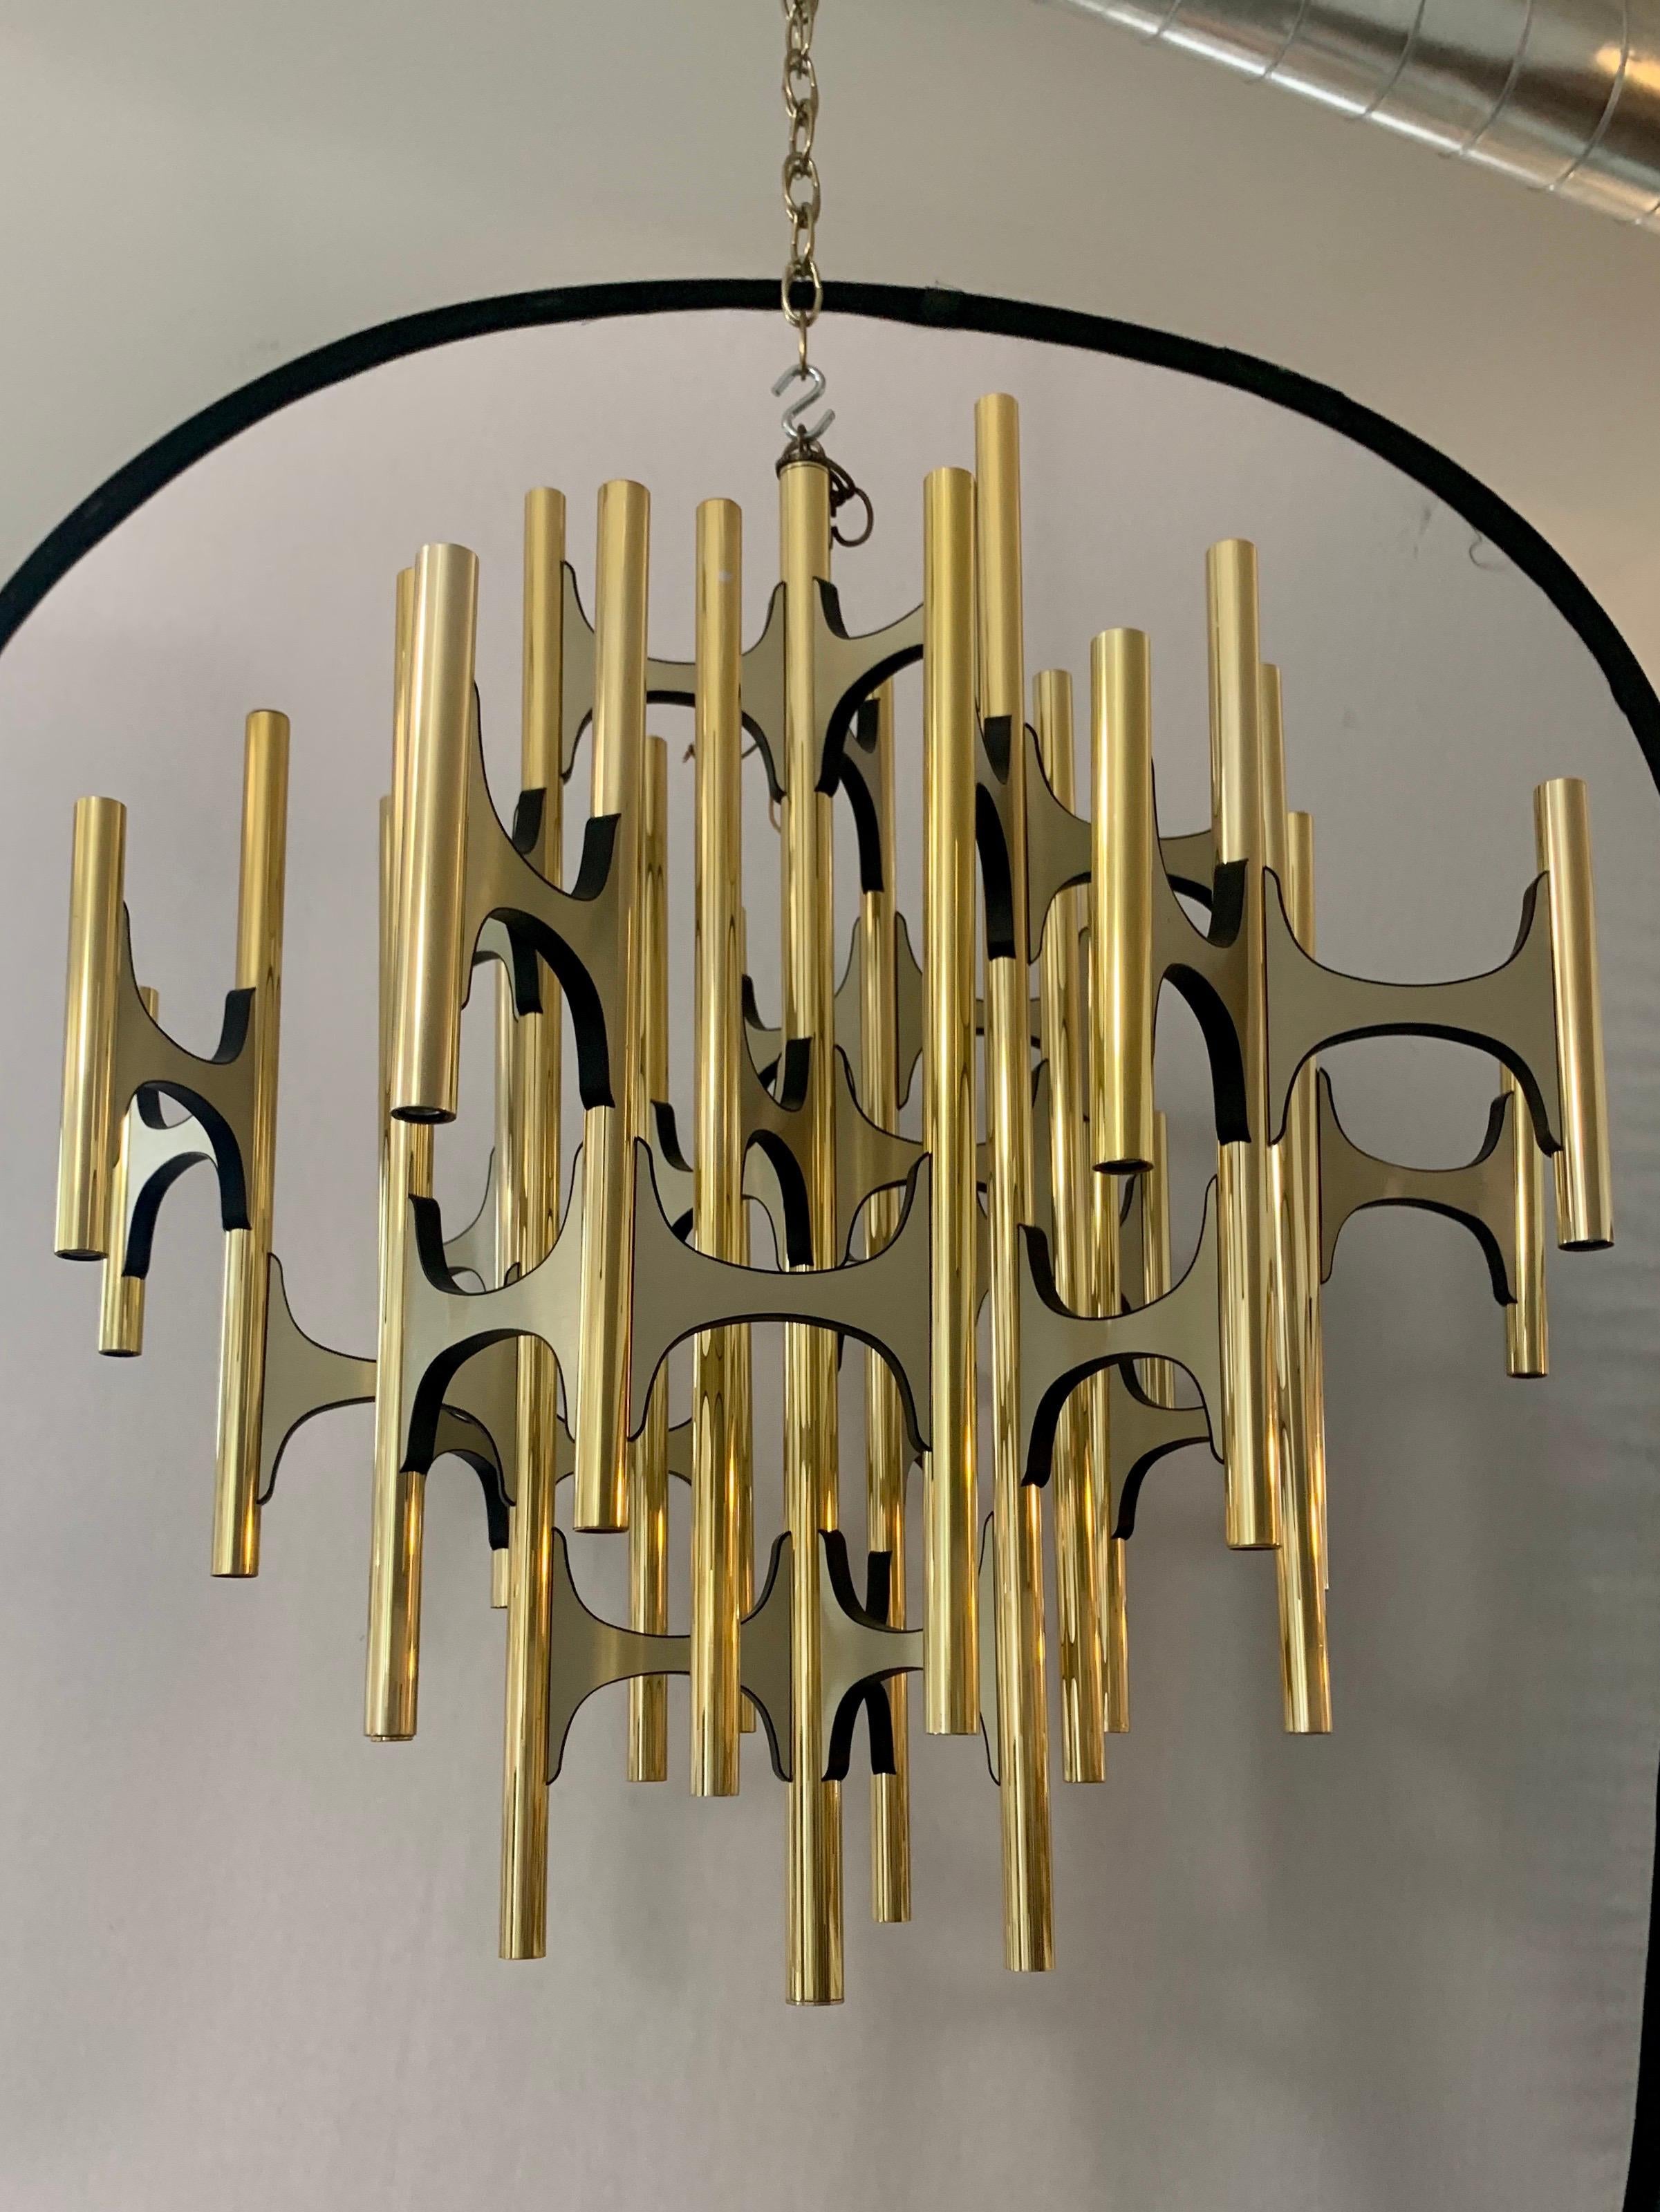 Rare brass, versus chrome, Gaetano Sciolari fifty two light chandelier. All gold and stunning.
As Sciolari chandeliers go, this is a large one. Wired for USA and in perfect working order.
Perfect for that special room in your upscale abode. Forty